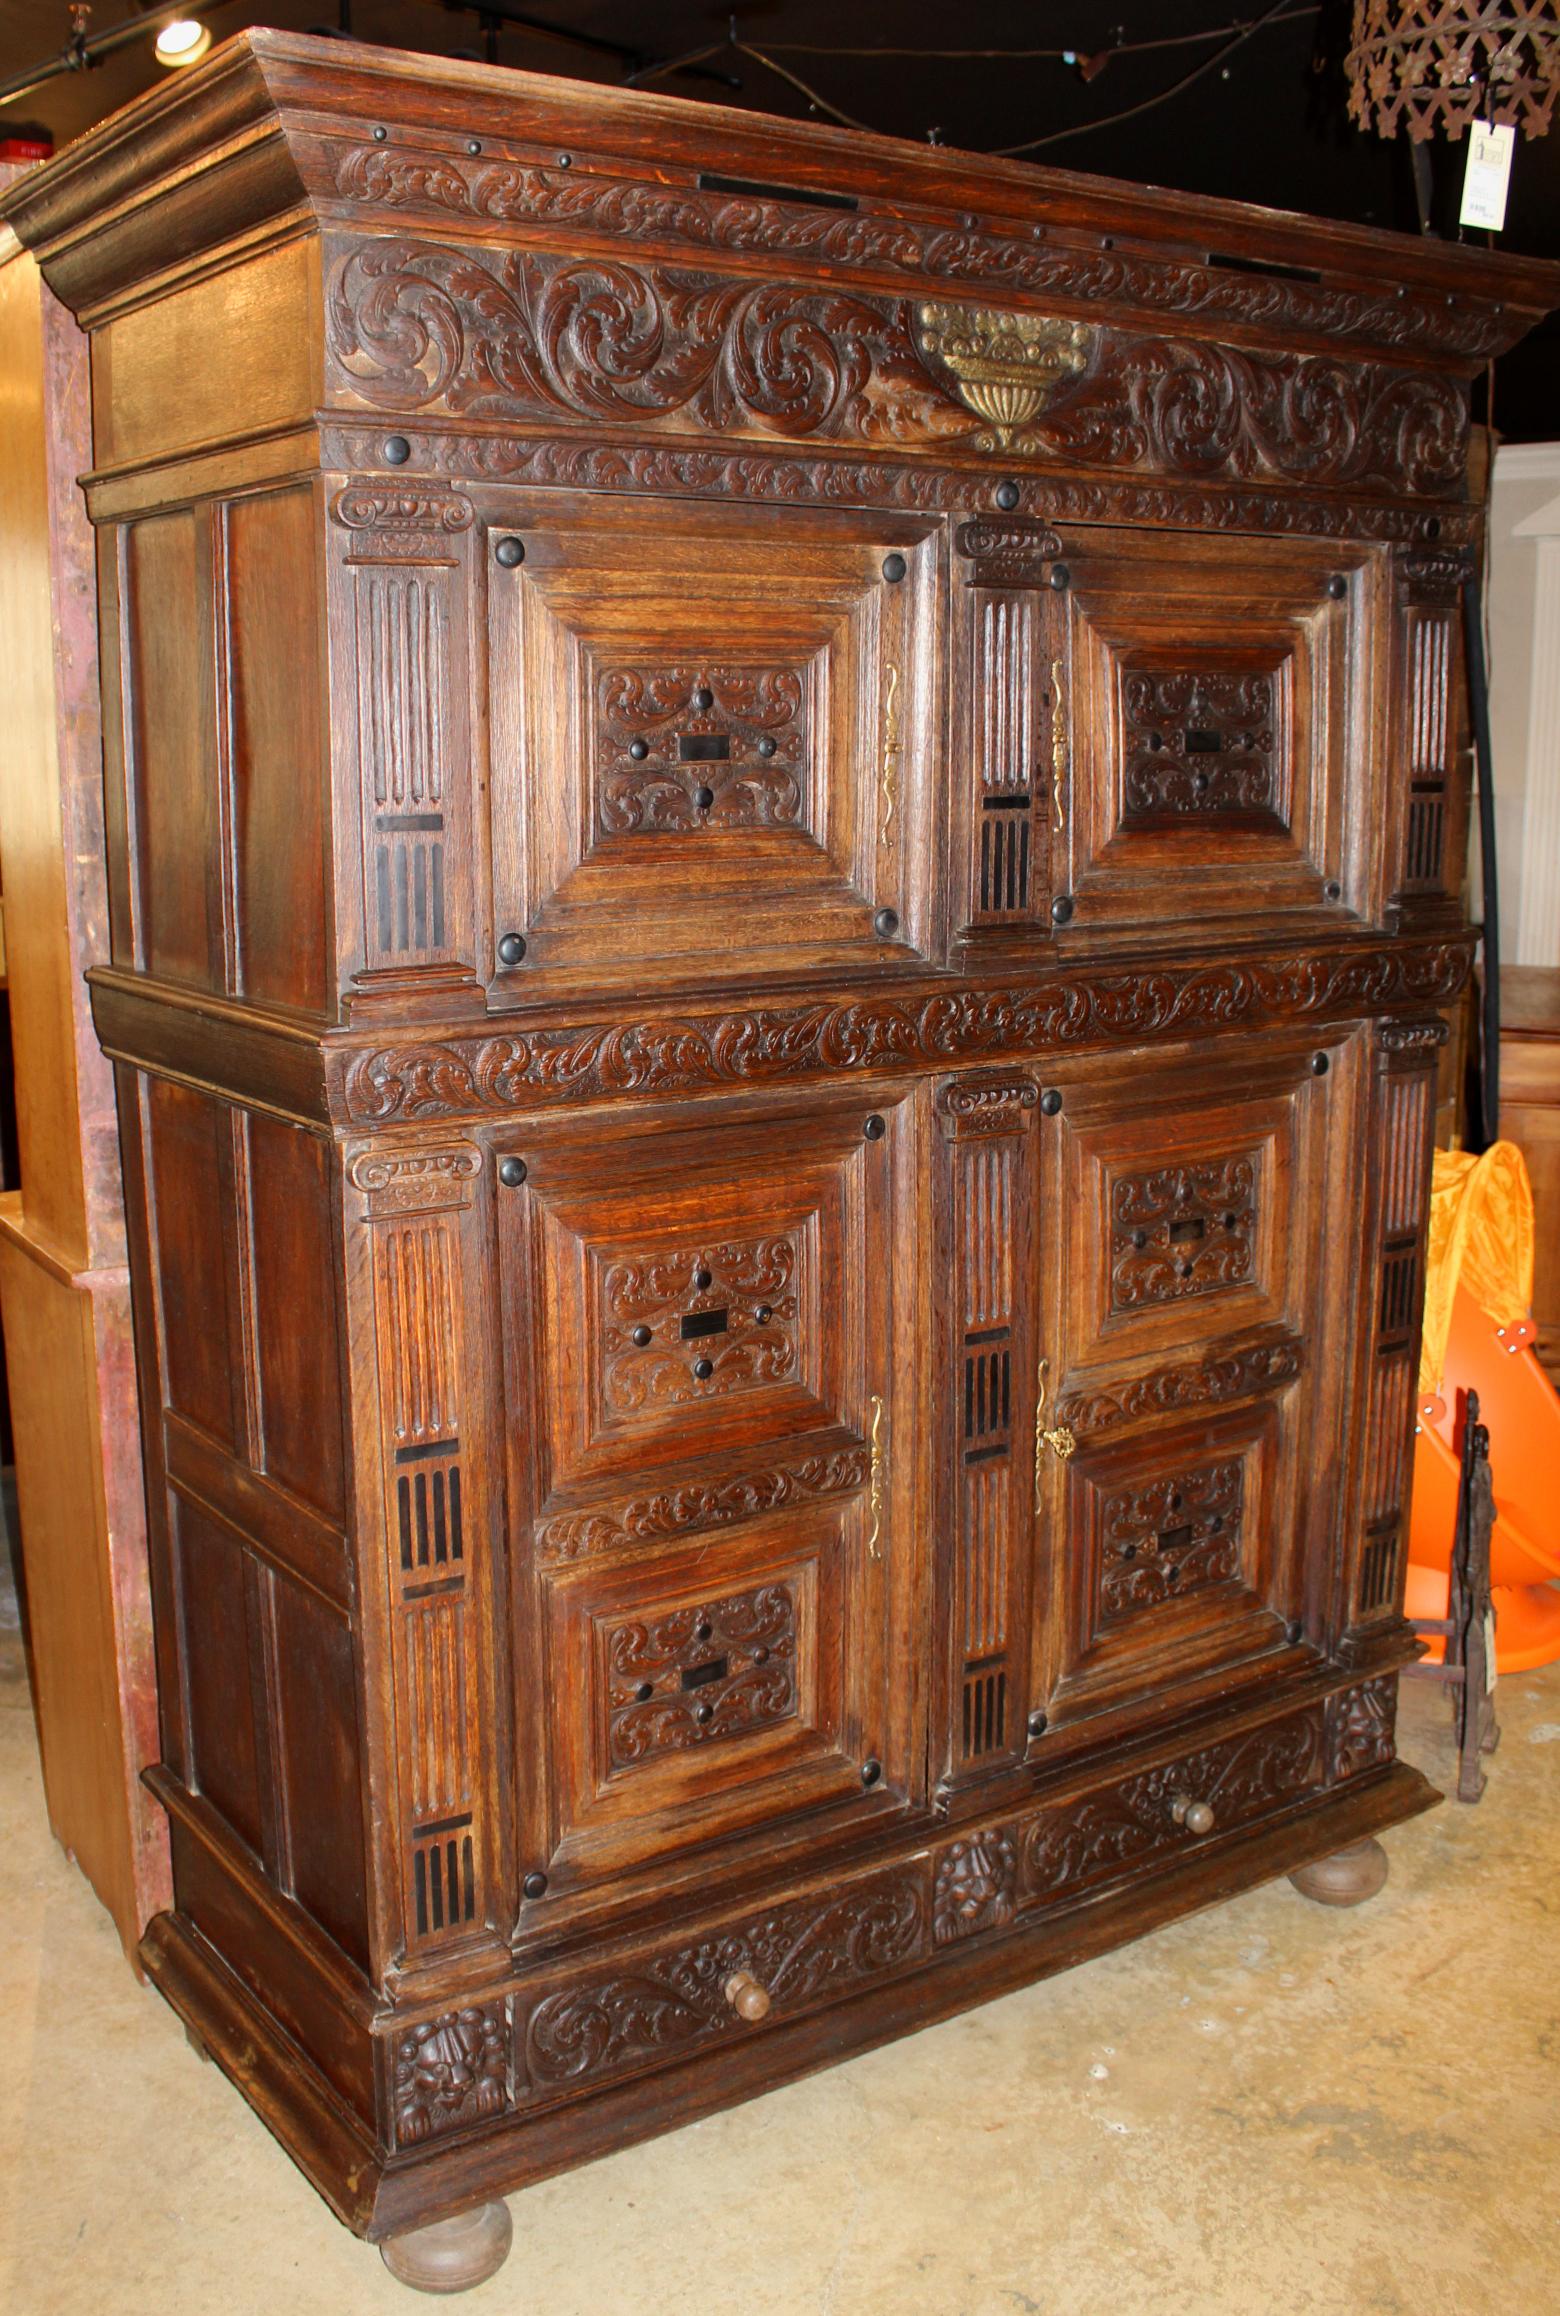 A fine 19th century German two-part oak court cupboard carved in the 17th century manner, the upper case with a molded cornice surmounting a foliate carved case frieze with central gilt compote decoration over two carved panel doors, which open to